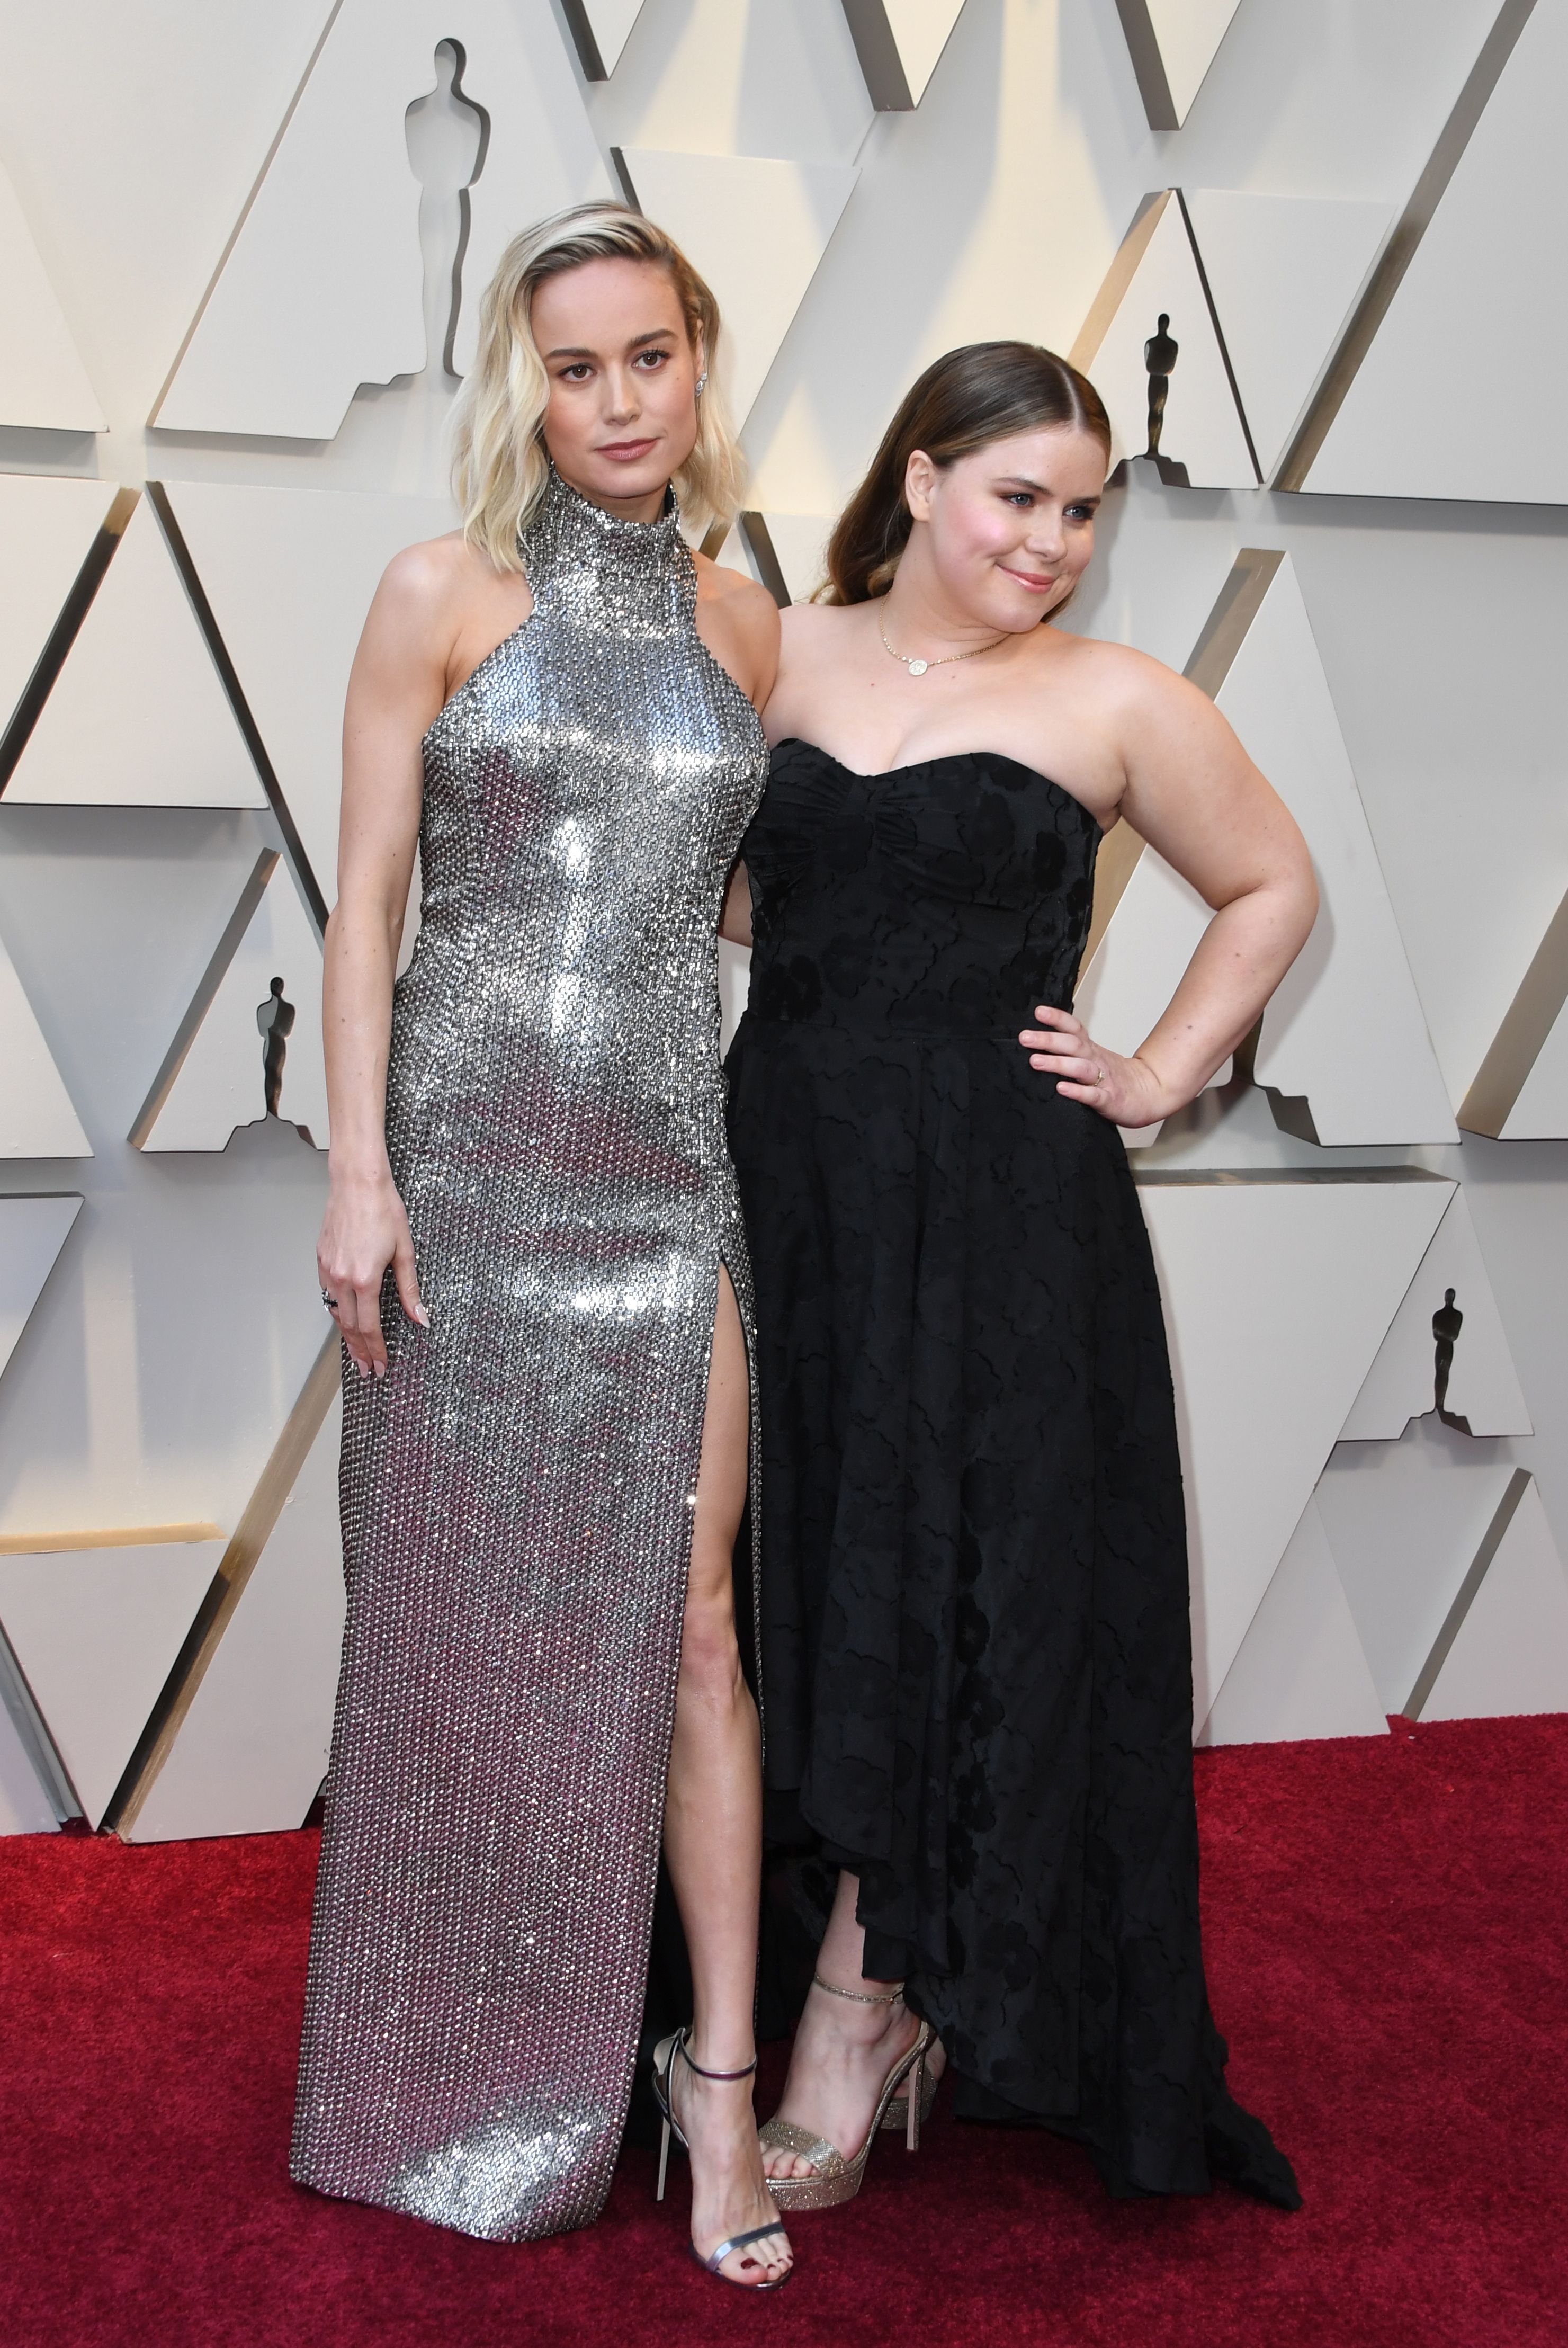 Brie Larson and Milaine Desaulniers at the 91st Annual Academy Awards on February 24, 2019, in California. | Source: Getty Images